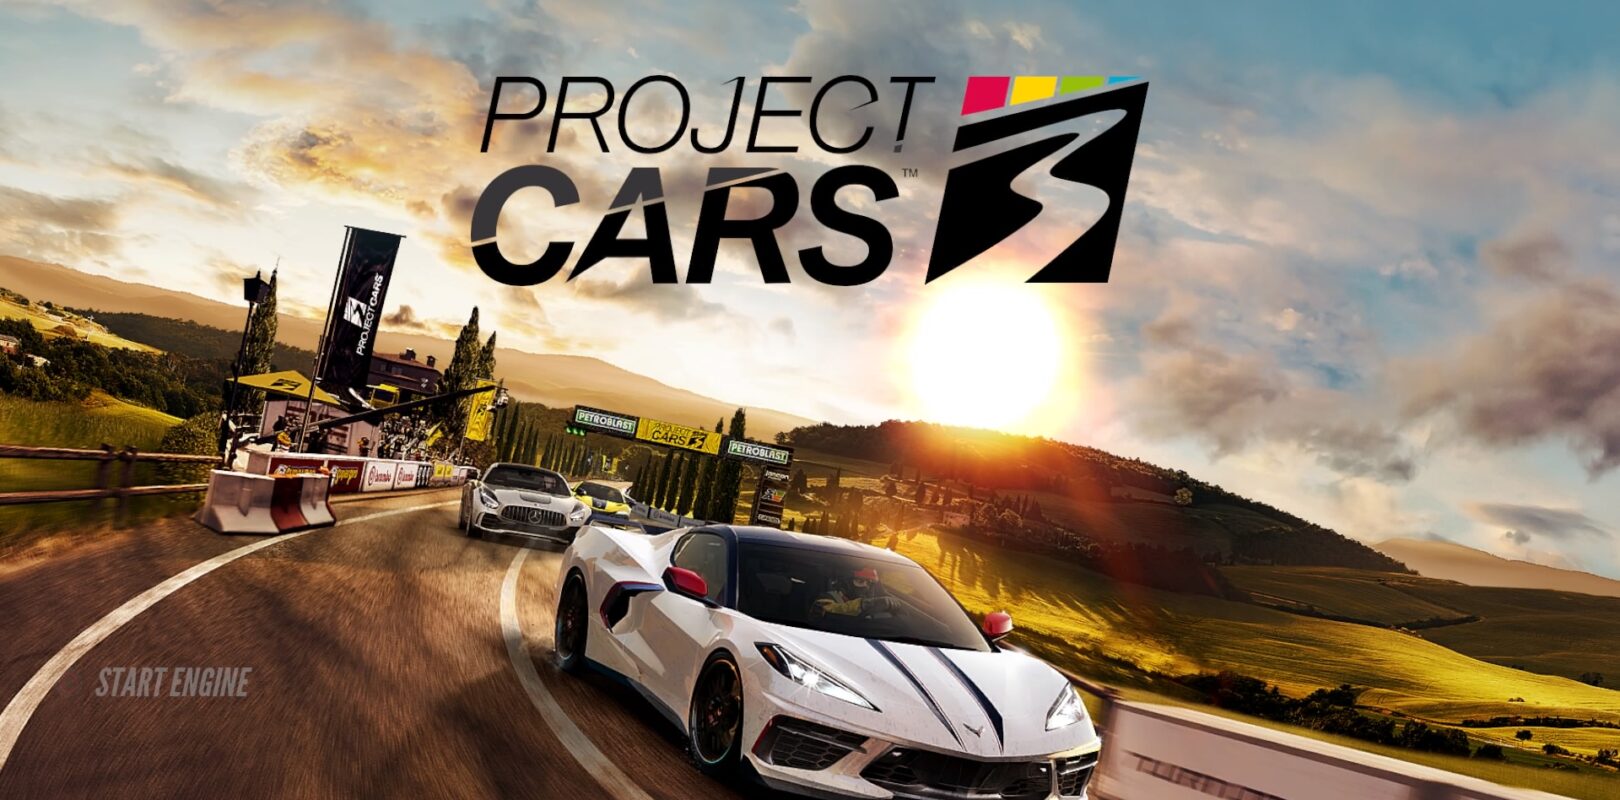  Project Cars 2 (PS4) : Video Games